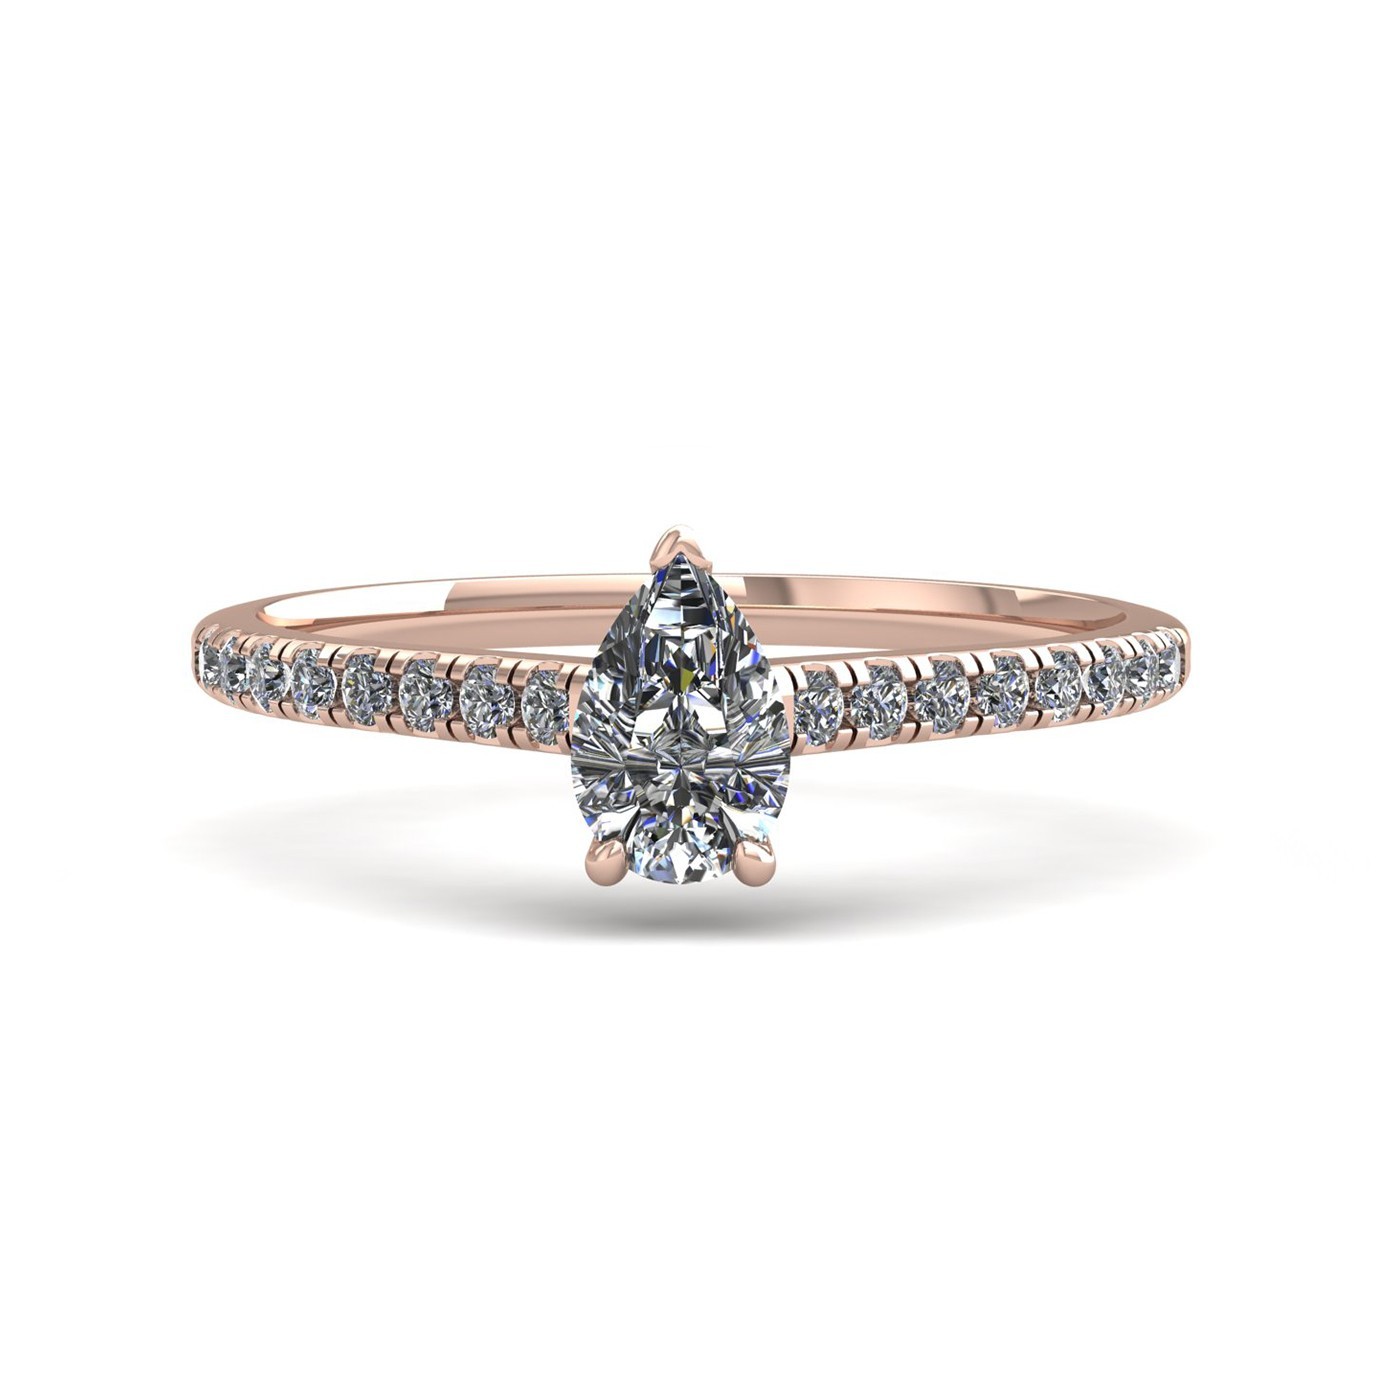 18k rose gold 1,50 ct 3 prongs pear cut diamond engagement ring with whisper thin pavÉ set band Photos & images